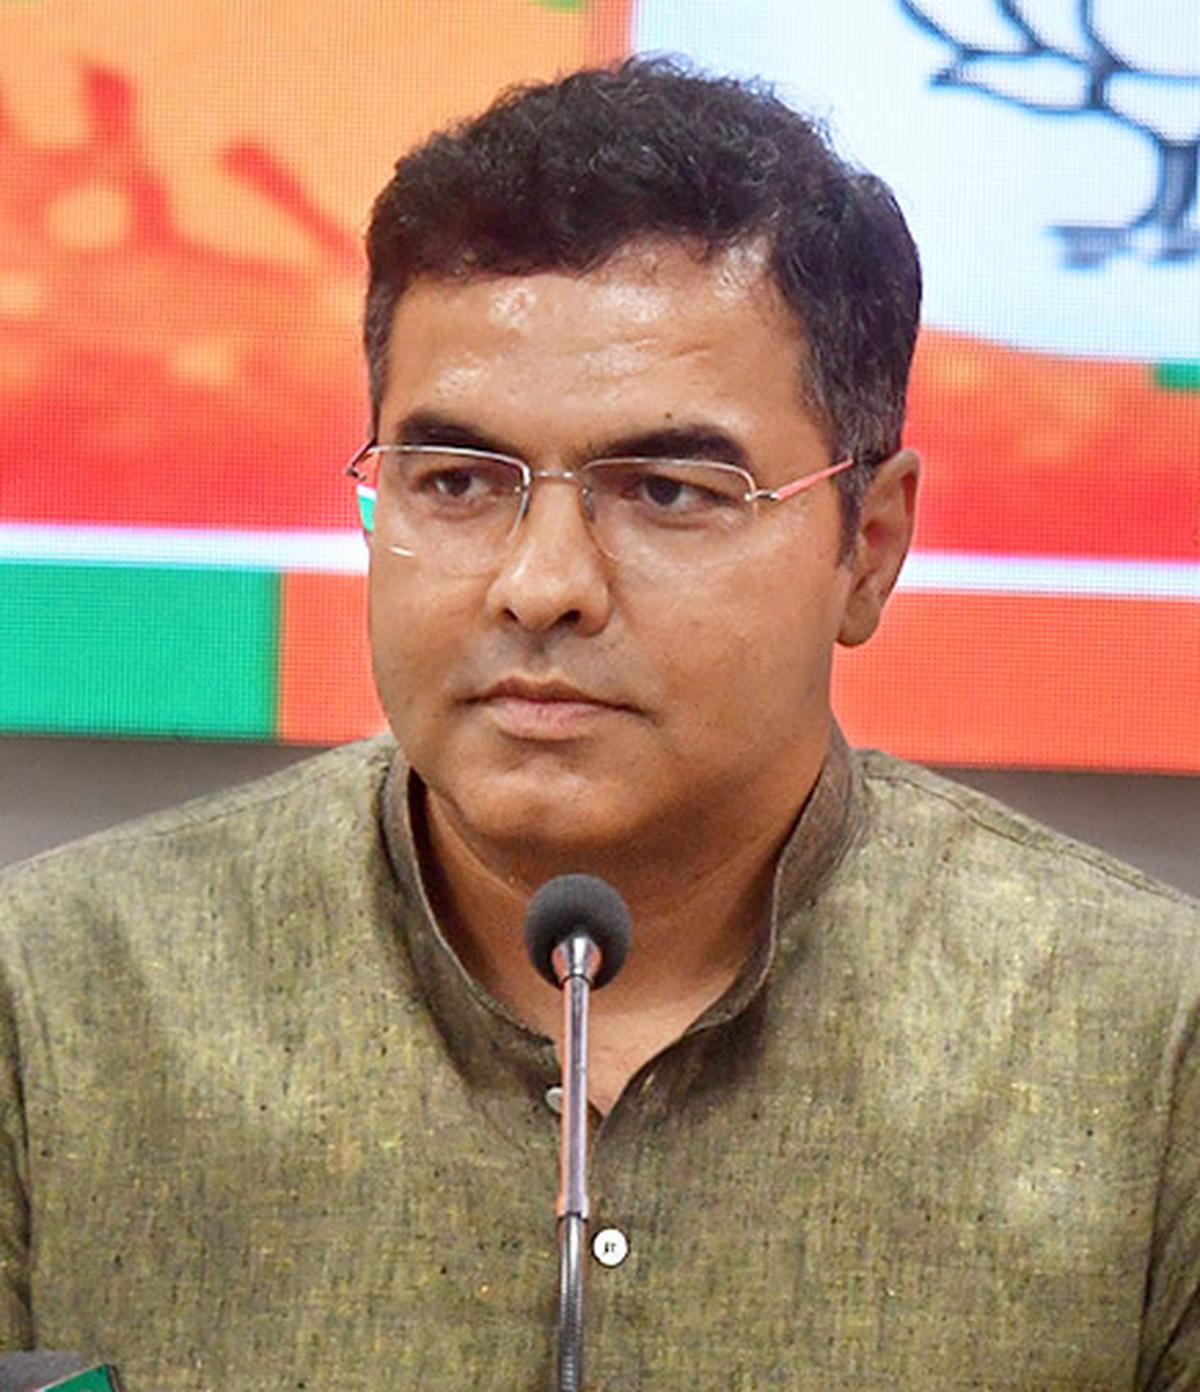 At a VHP event, BJP MP Parvesh Verma calls for the 'total boycott' of a community